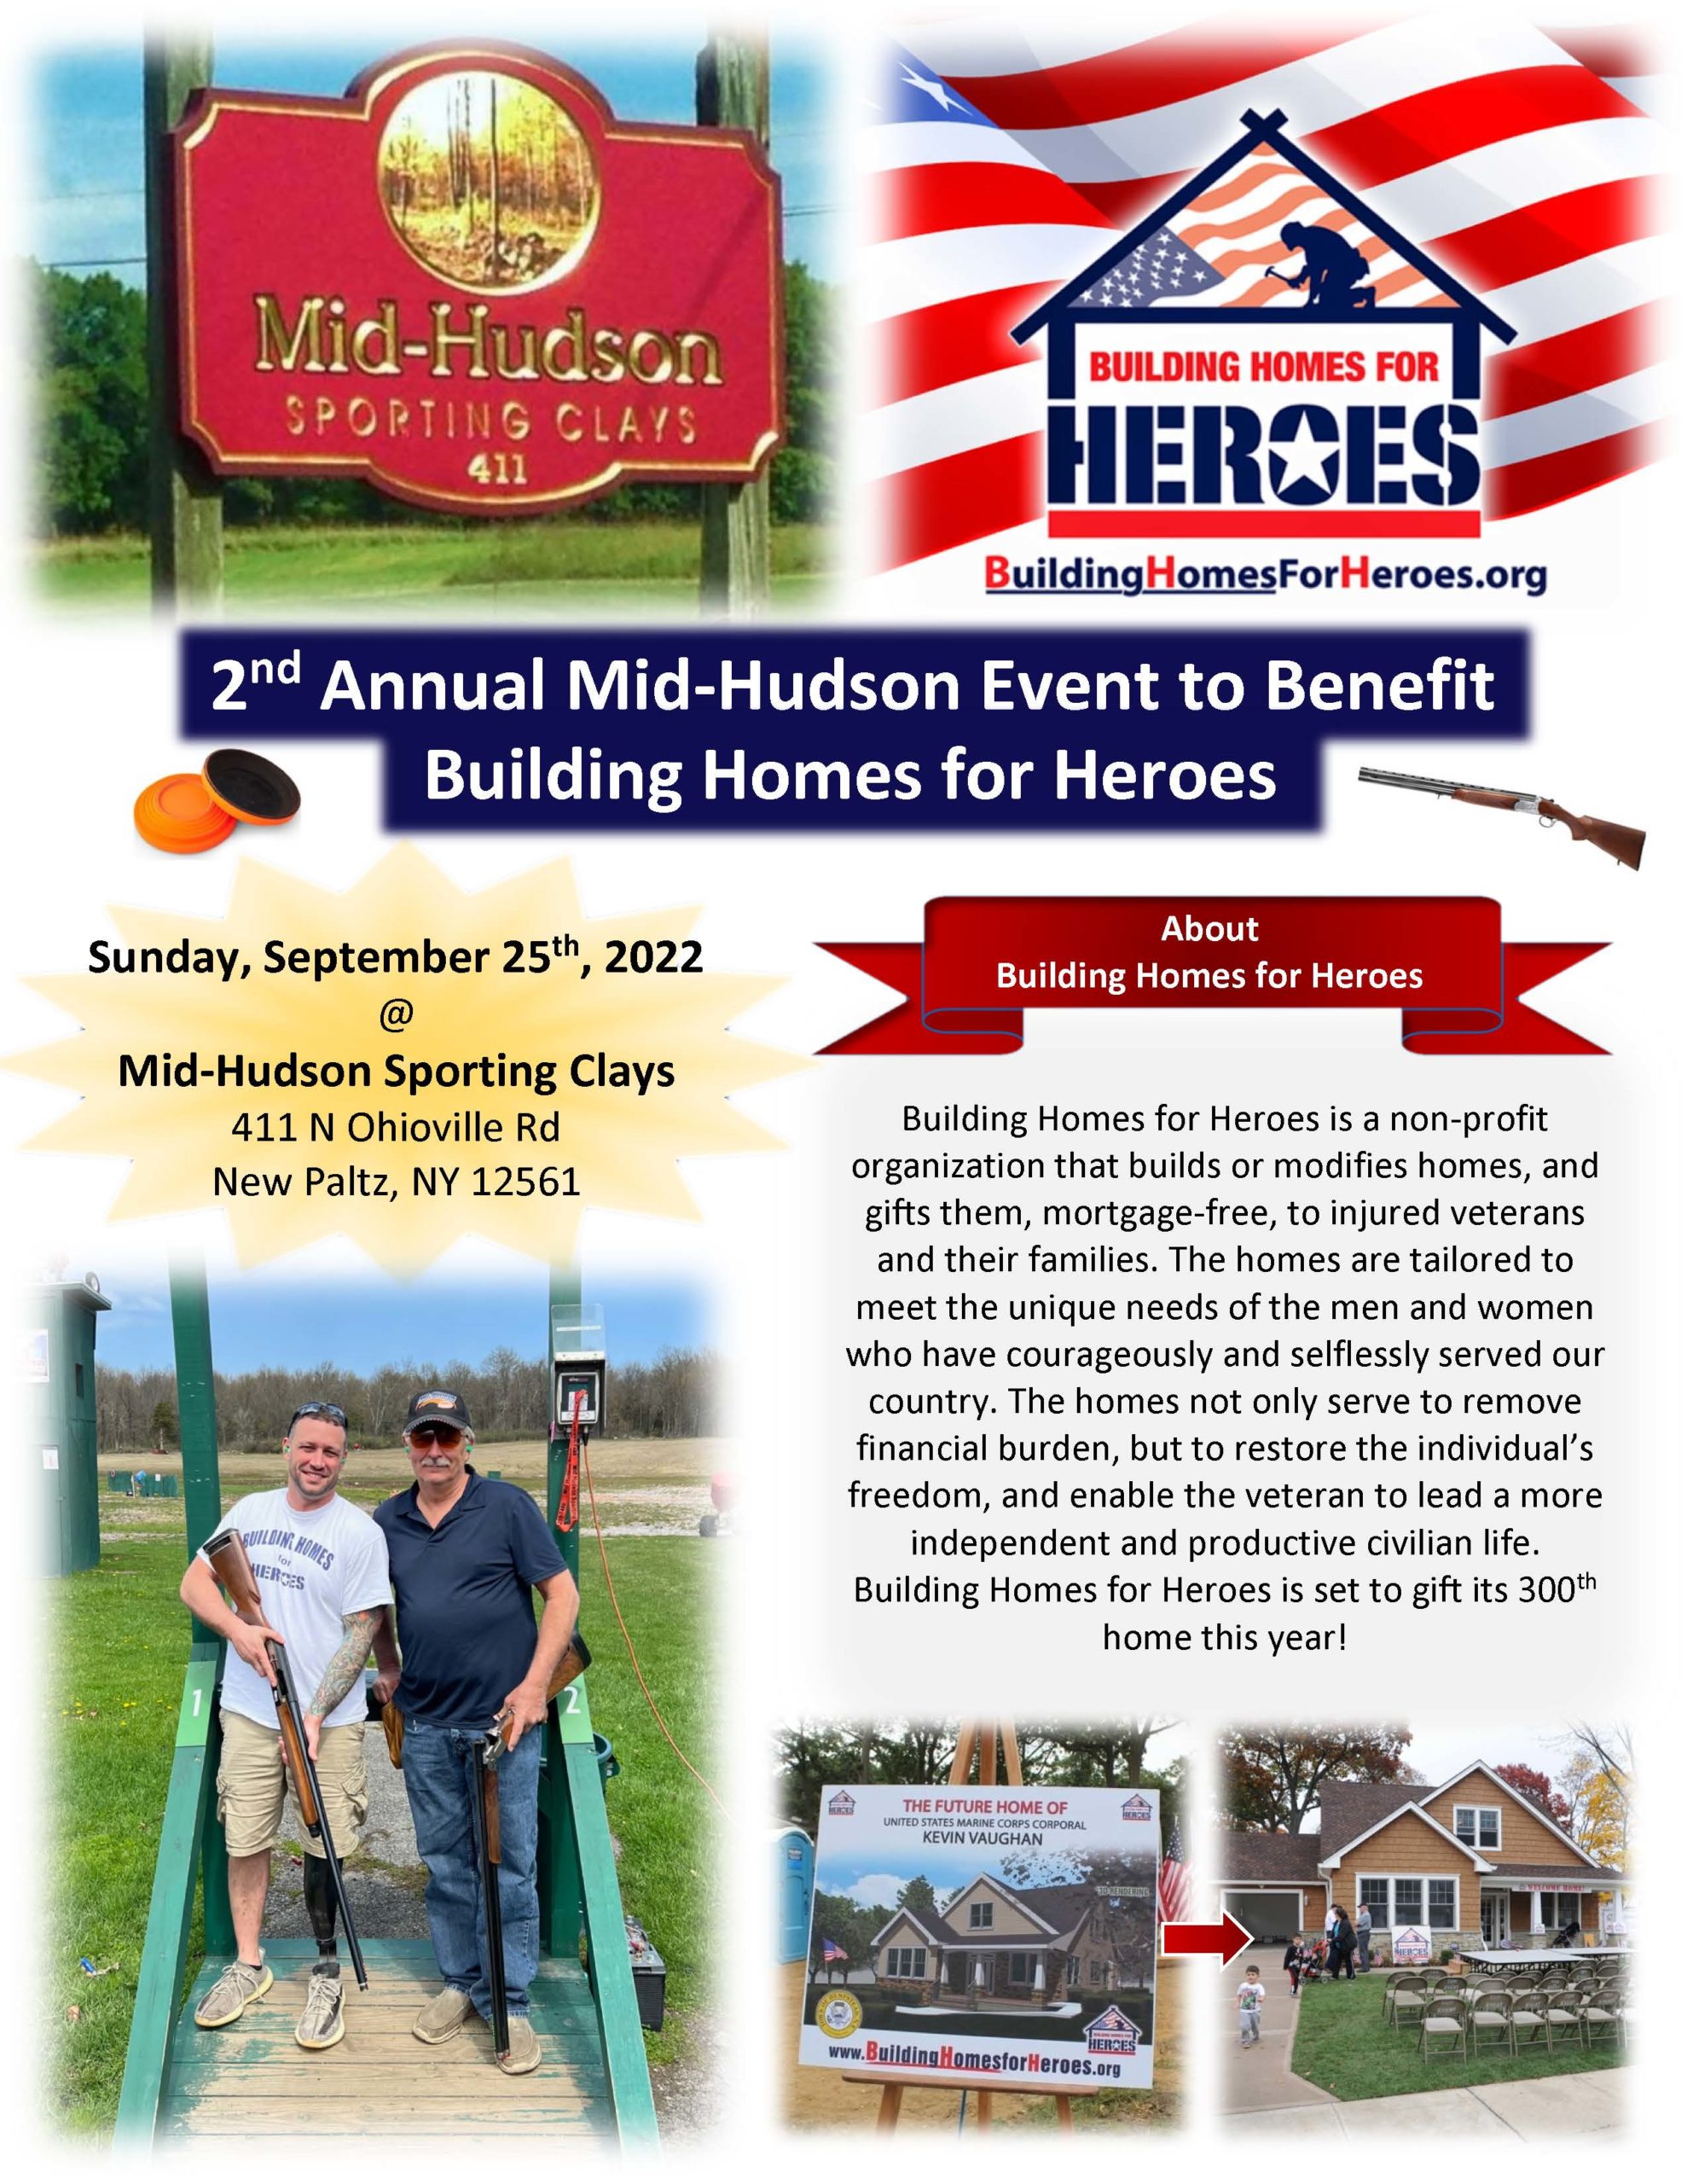 2nd Annual Mid-Hudson Event @ Mid-Hudson Sporting Clays